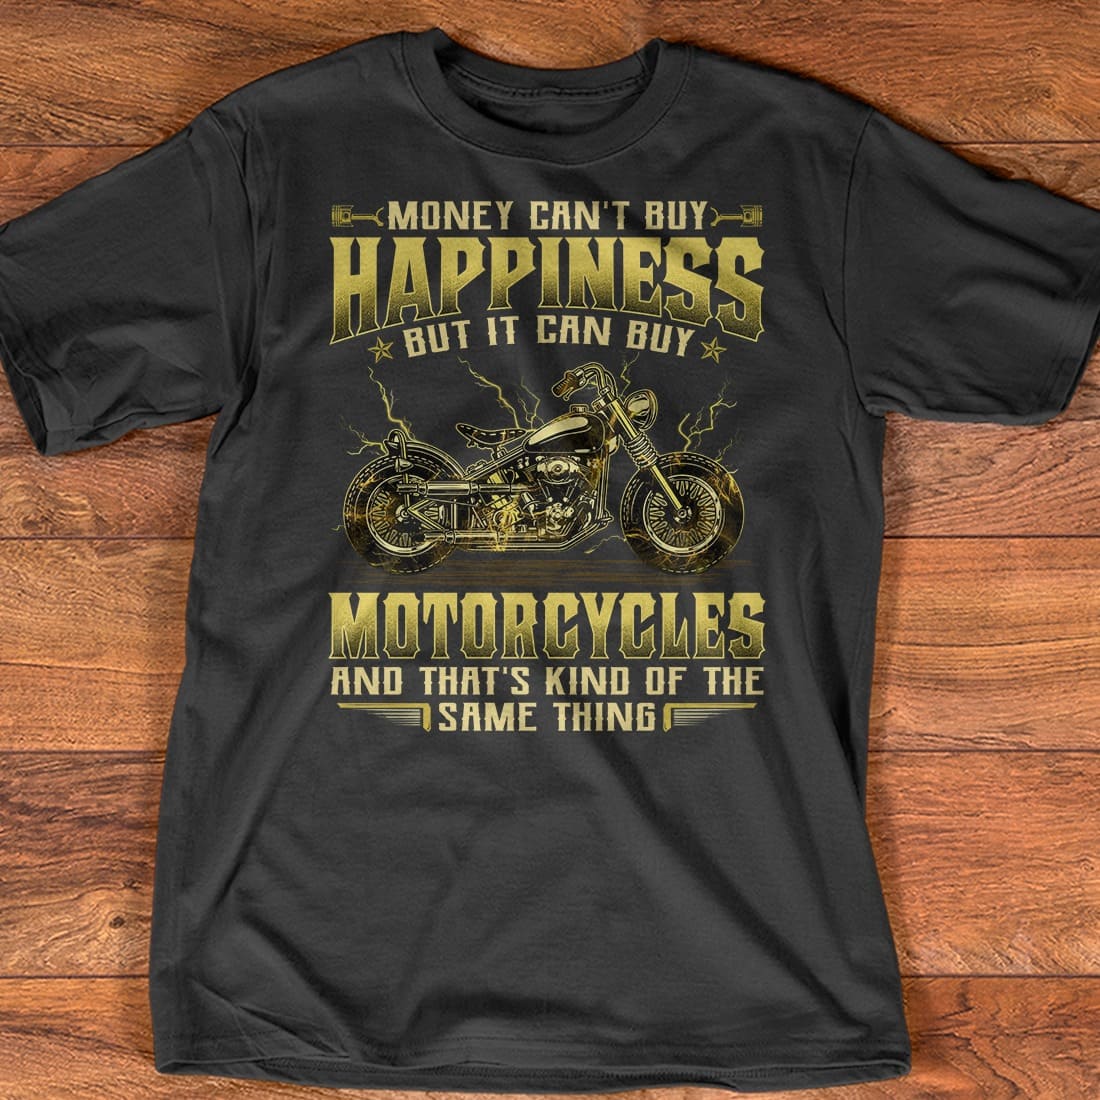 Money can't buy happiness but it can buy motorcycles and that's kind of the same thing - Gift for motorcycle collector